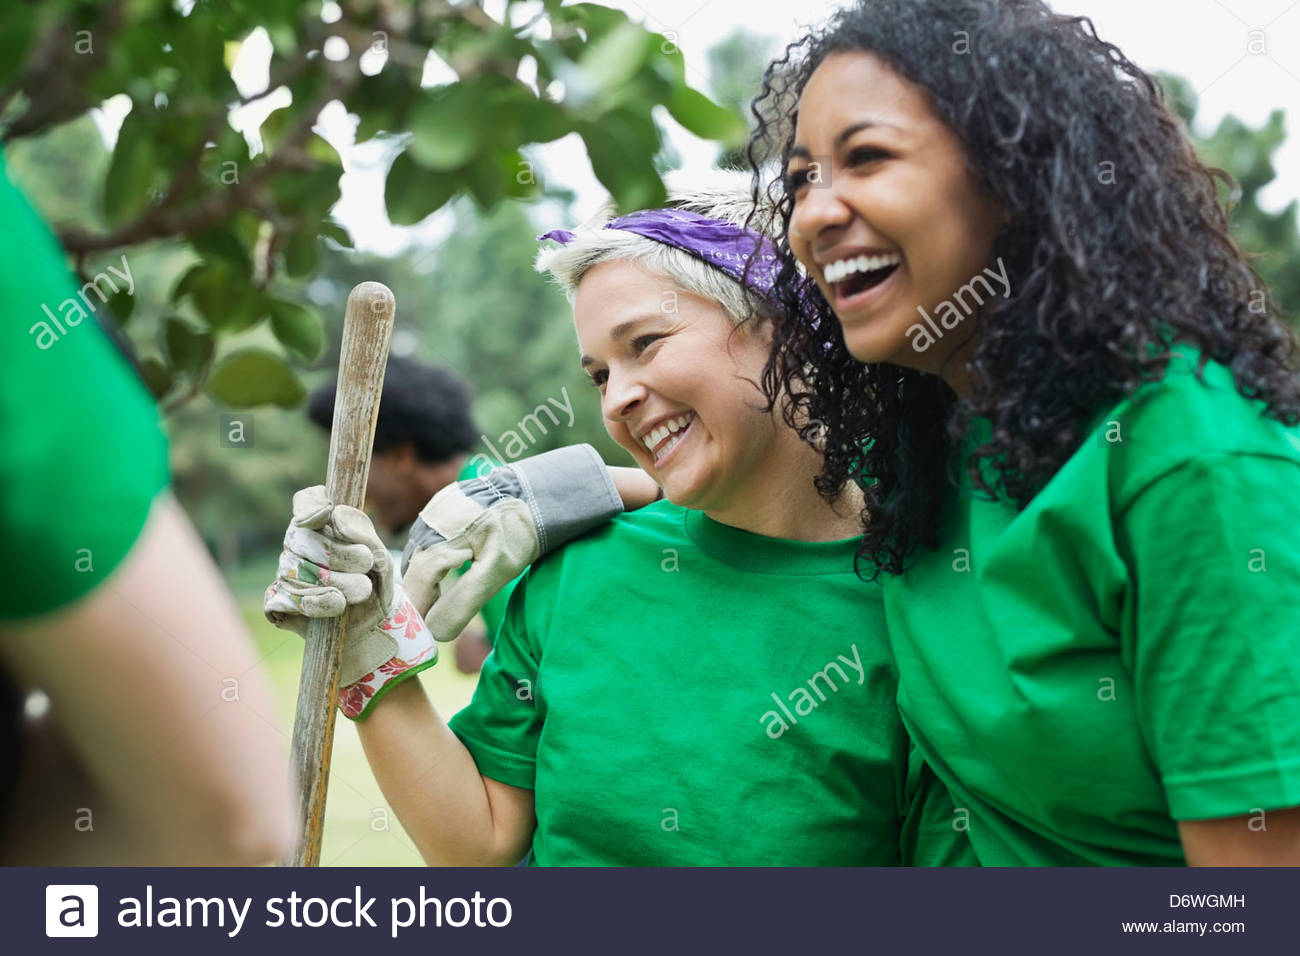 Happy young female environmentalist with friend holding shovel in park Stock Photo